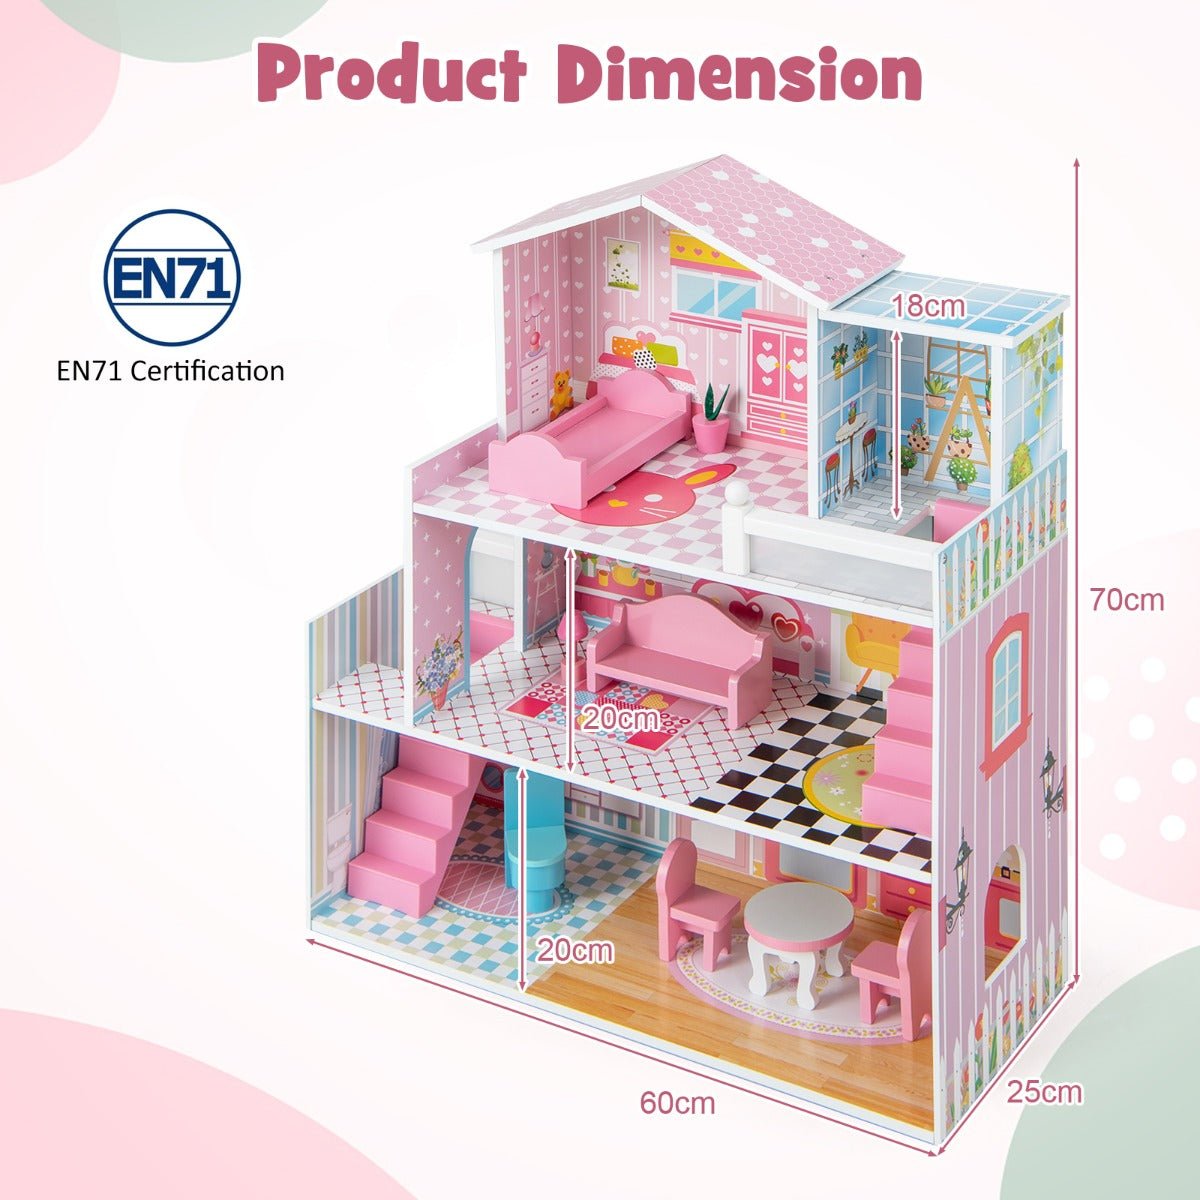 Quality and Fun: Pink Wooden Dollhouse